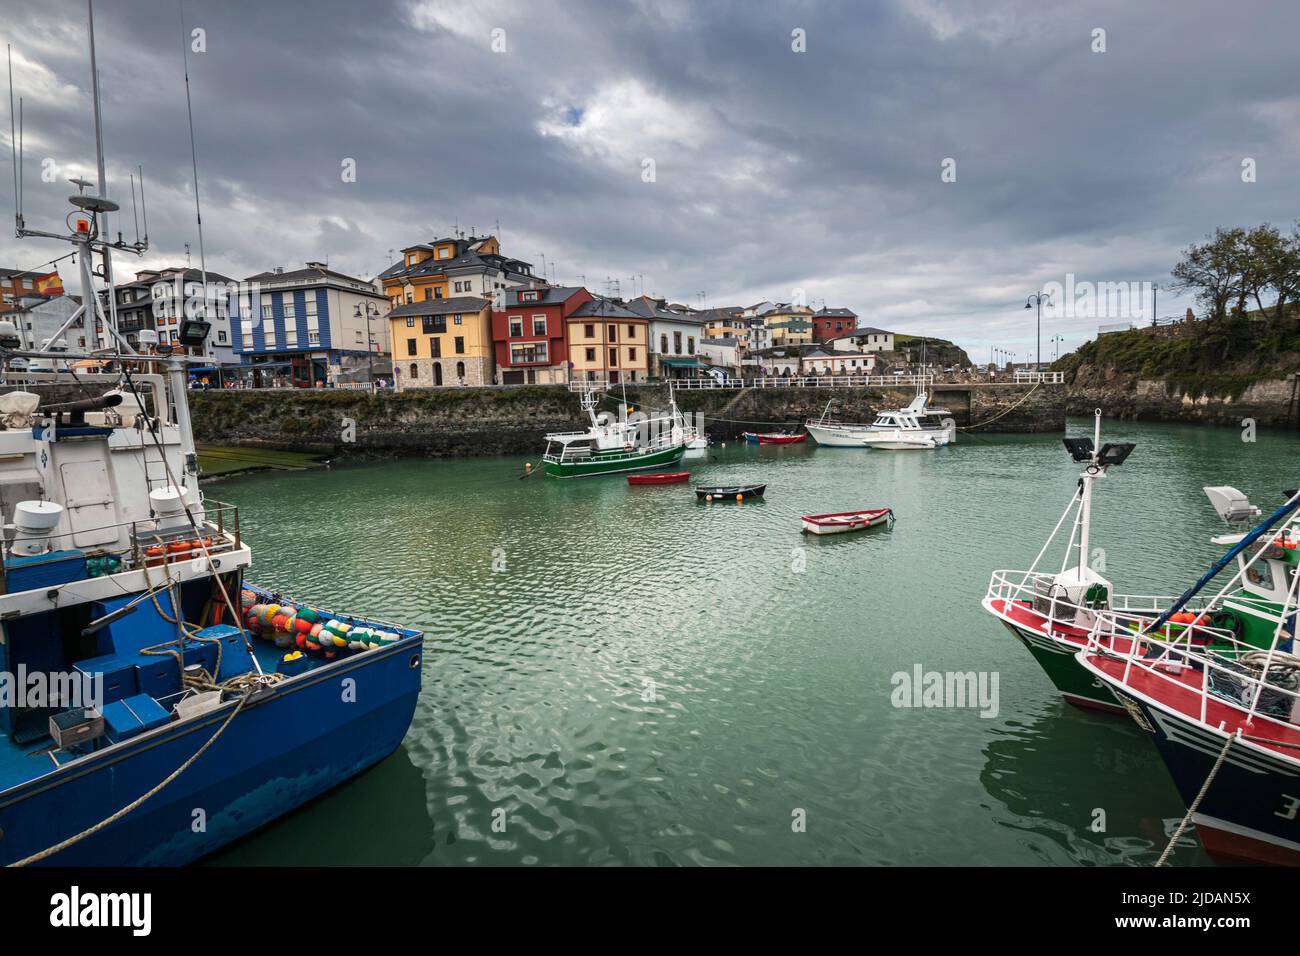 Picturesque port area of Puerto de Vega town in Asturias, Spain with beautiful blue waters and fishing boats. Stock Photo